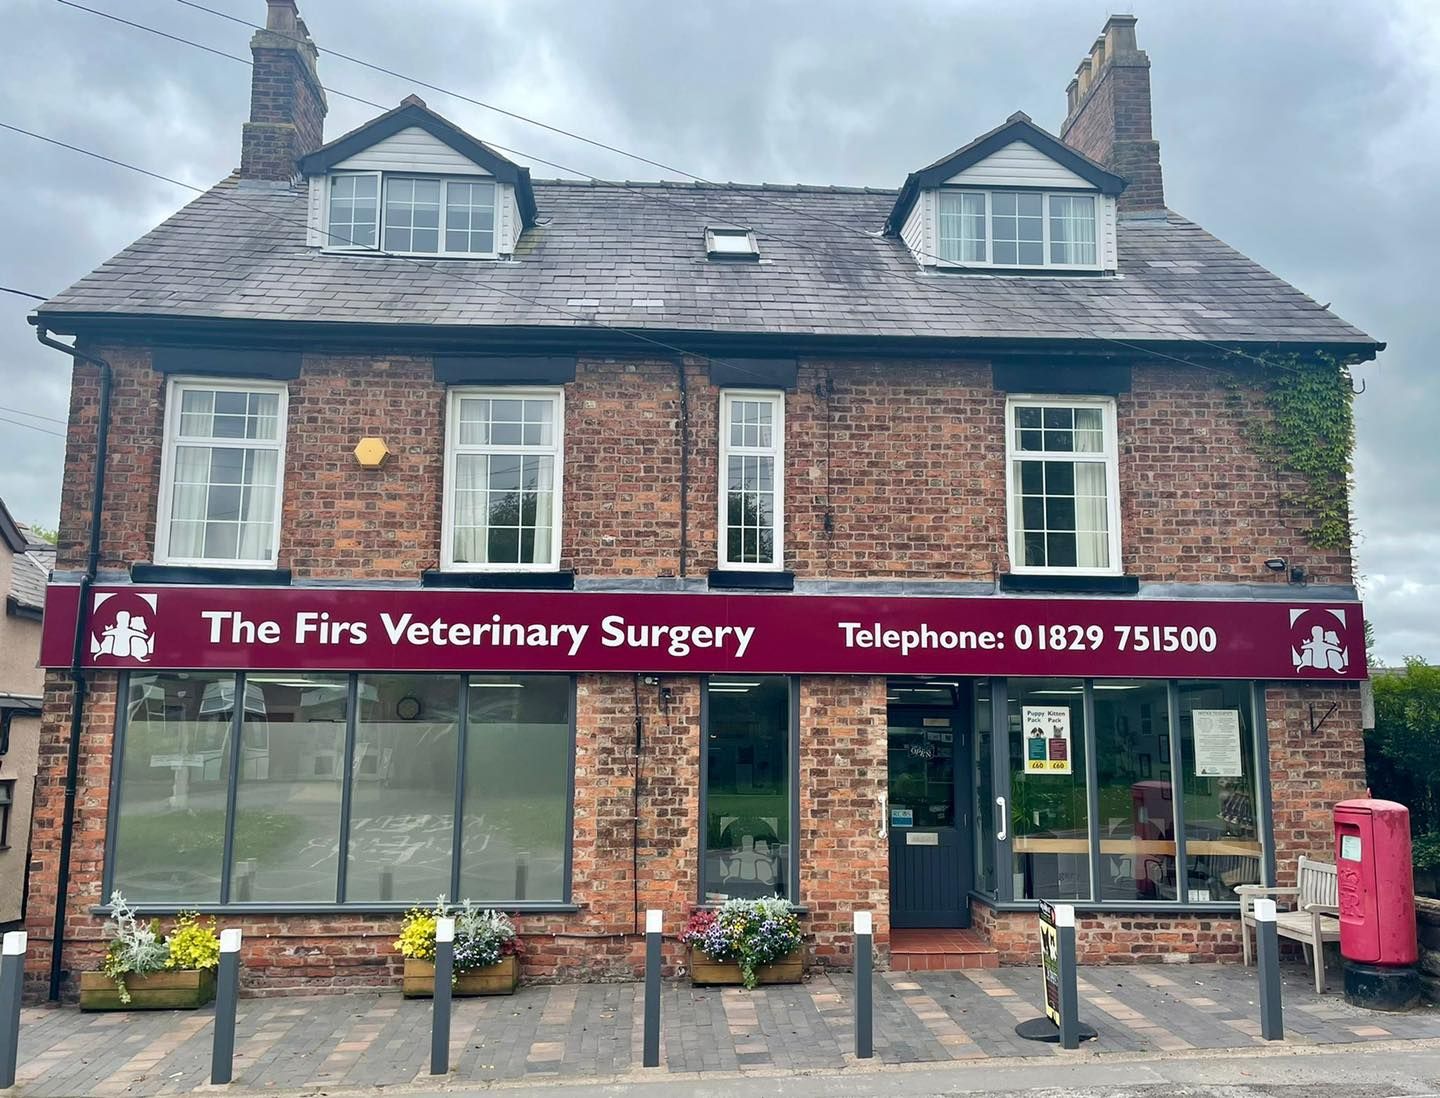 The Firs Veterinary Surgery